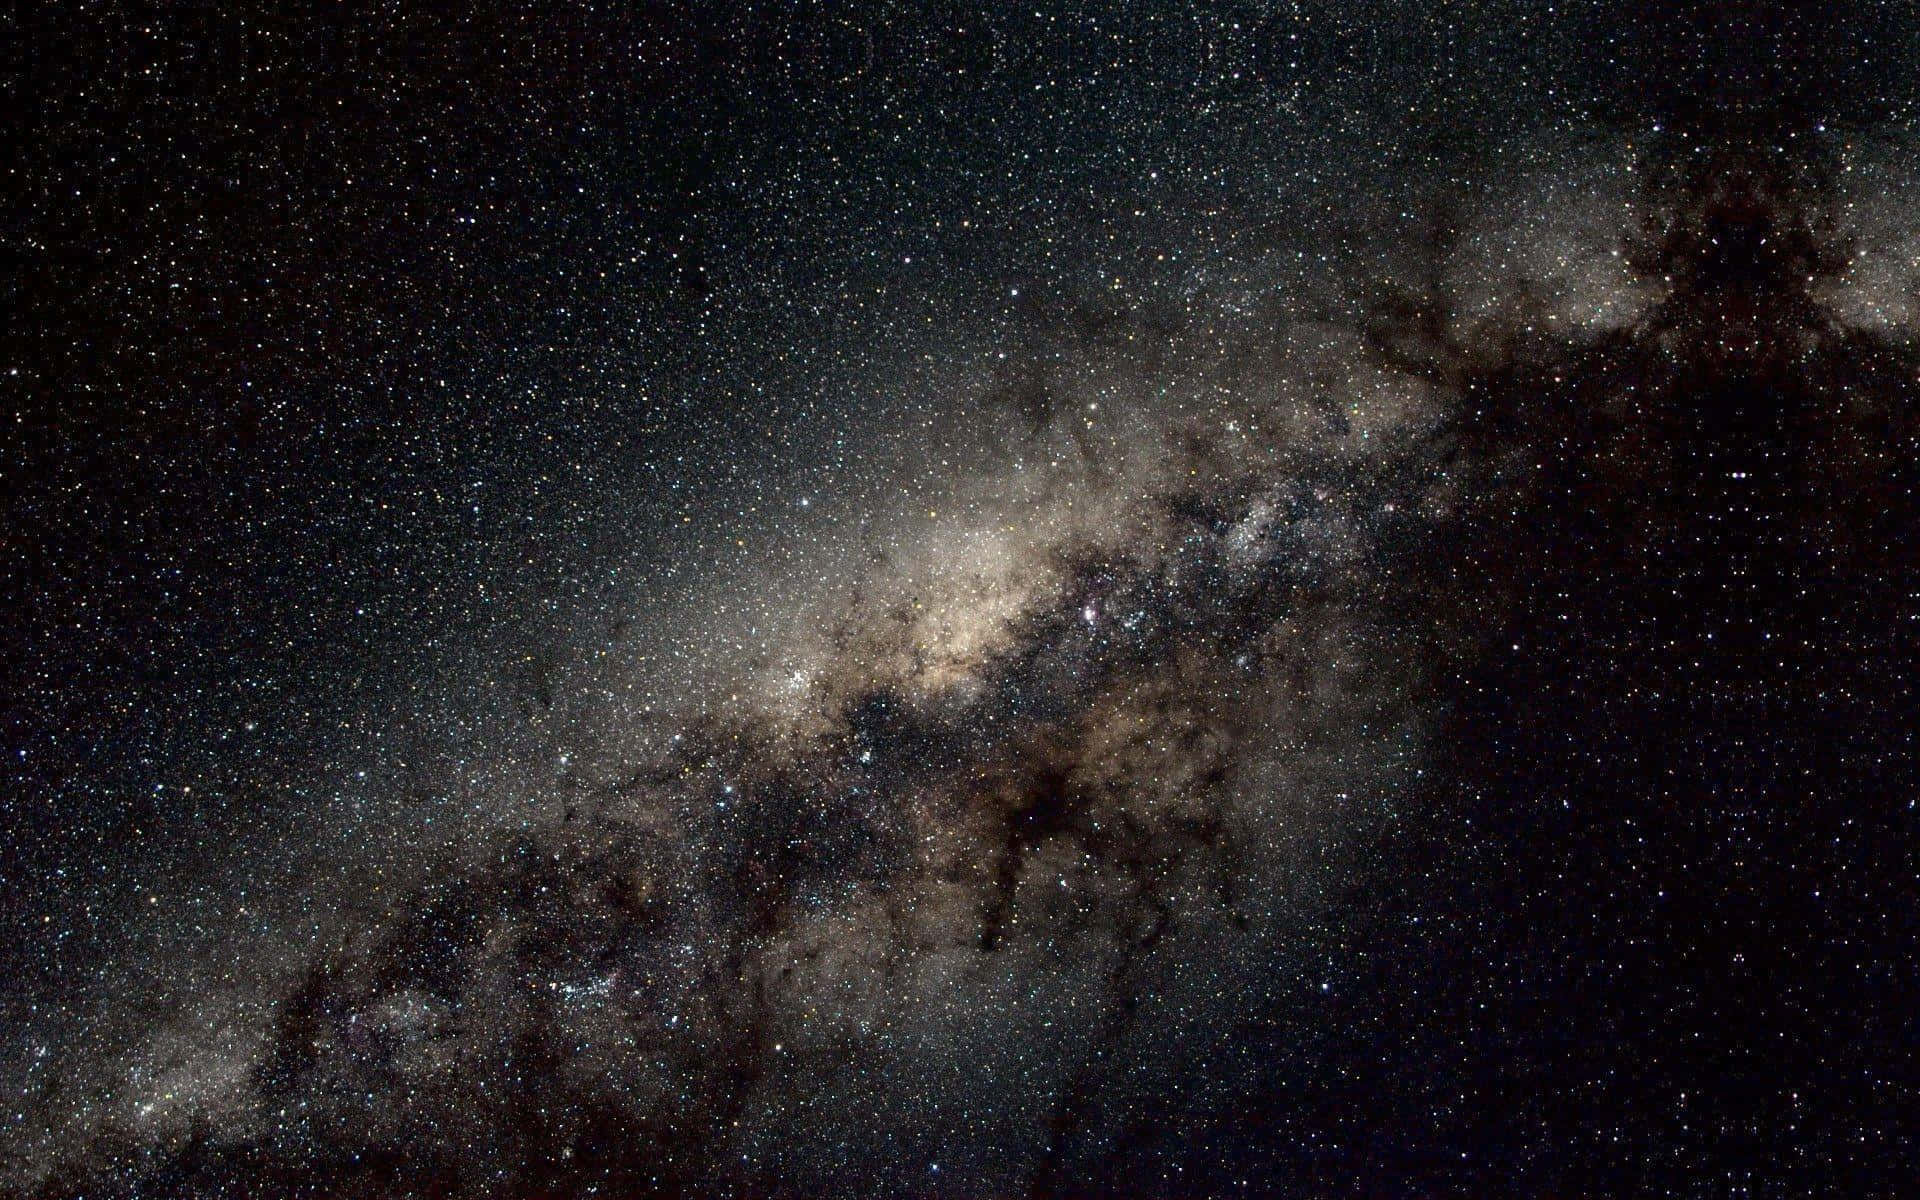 Take a journey through the stars and explore the Milky Way